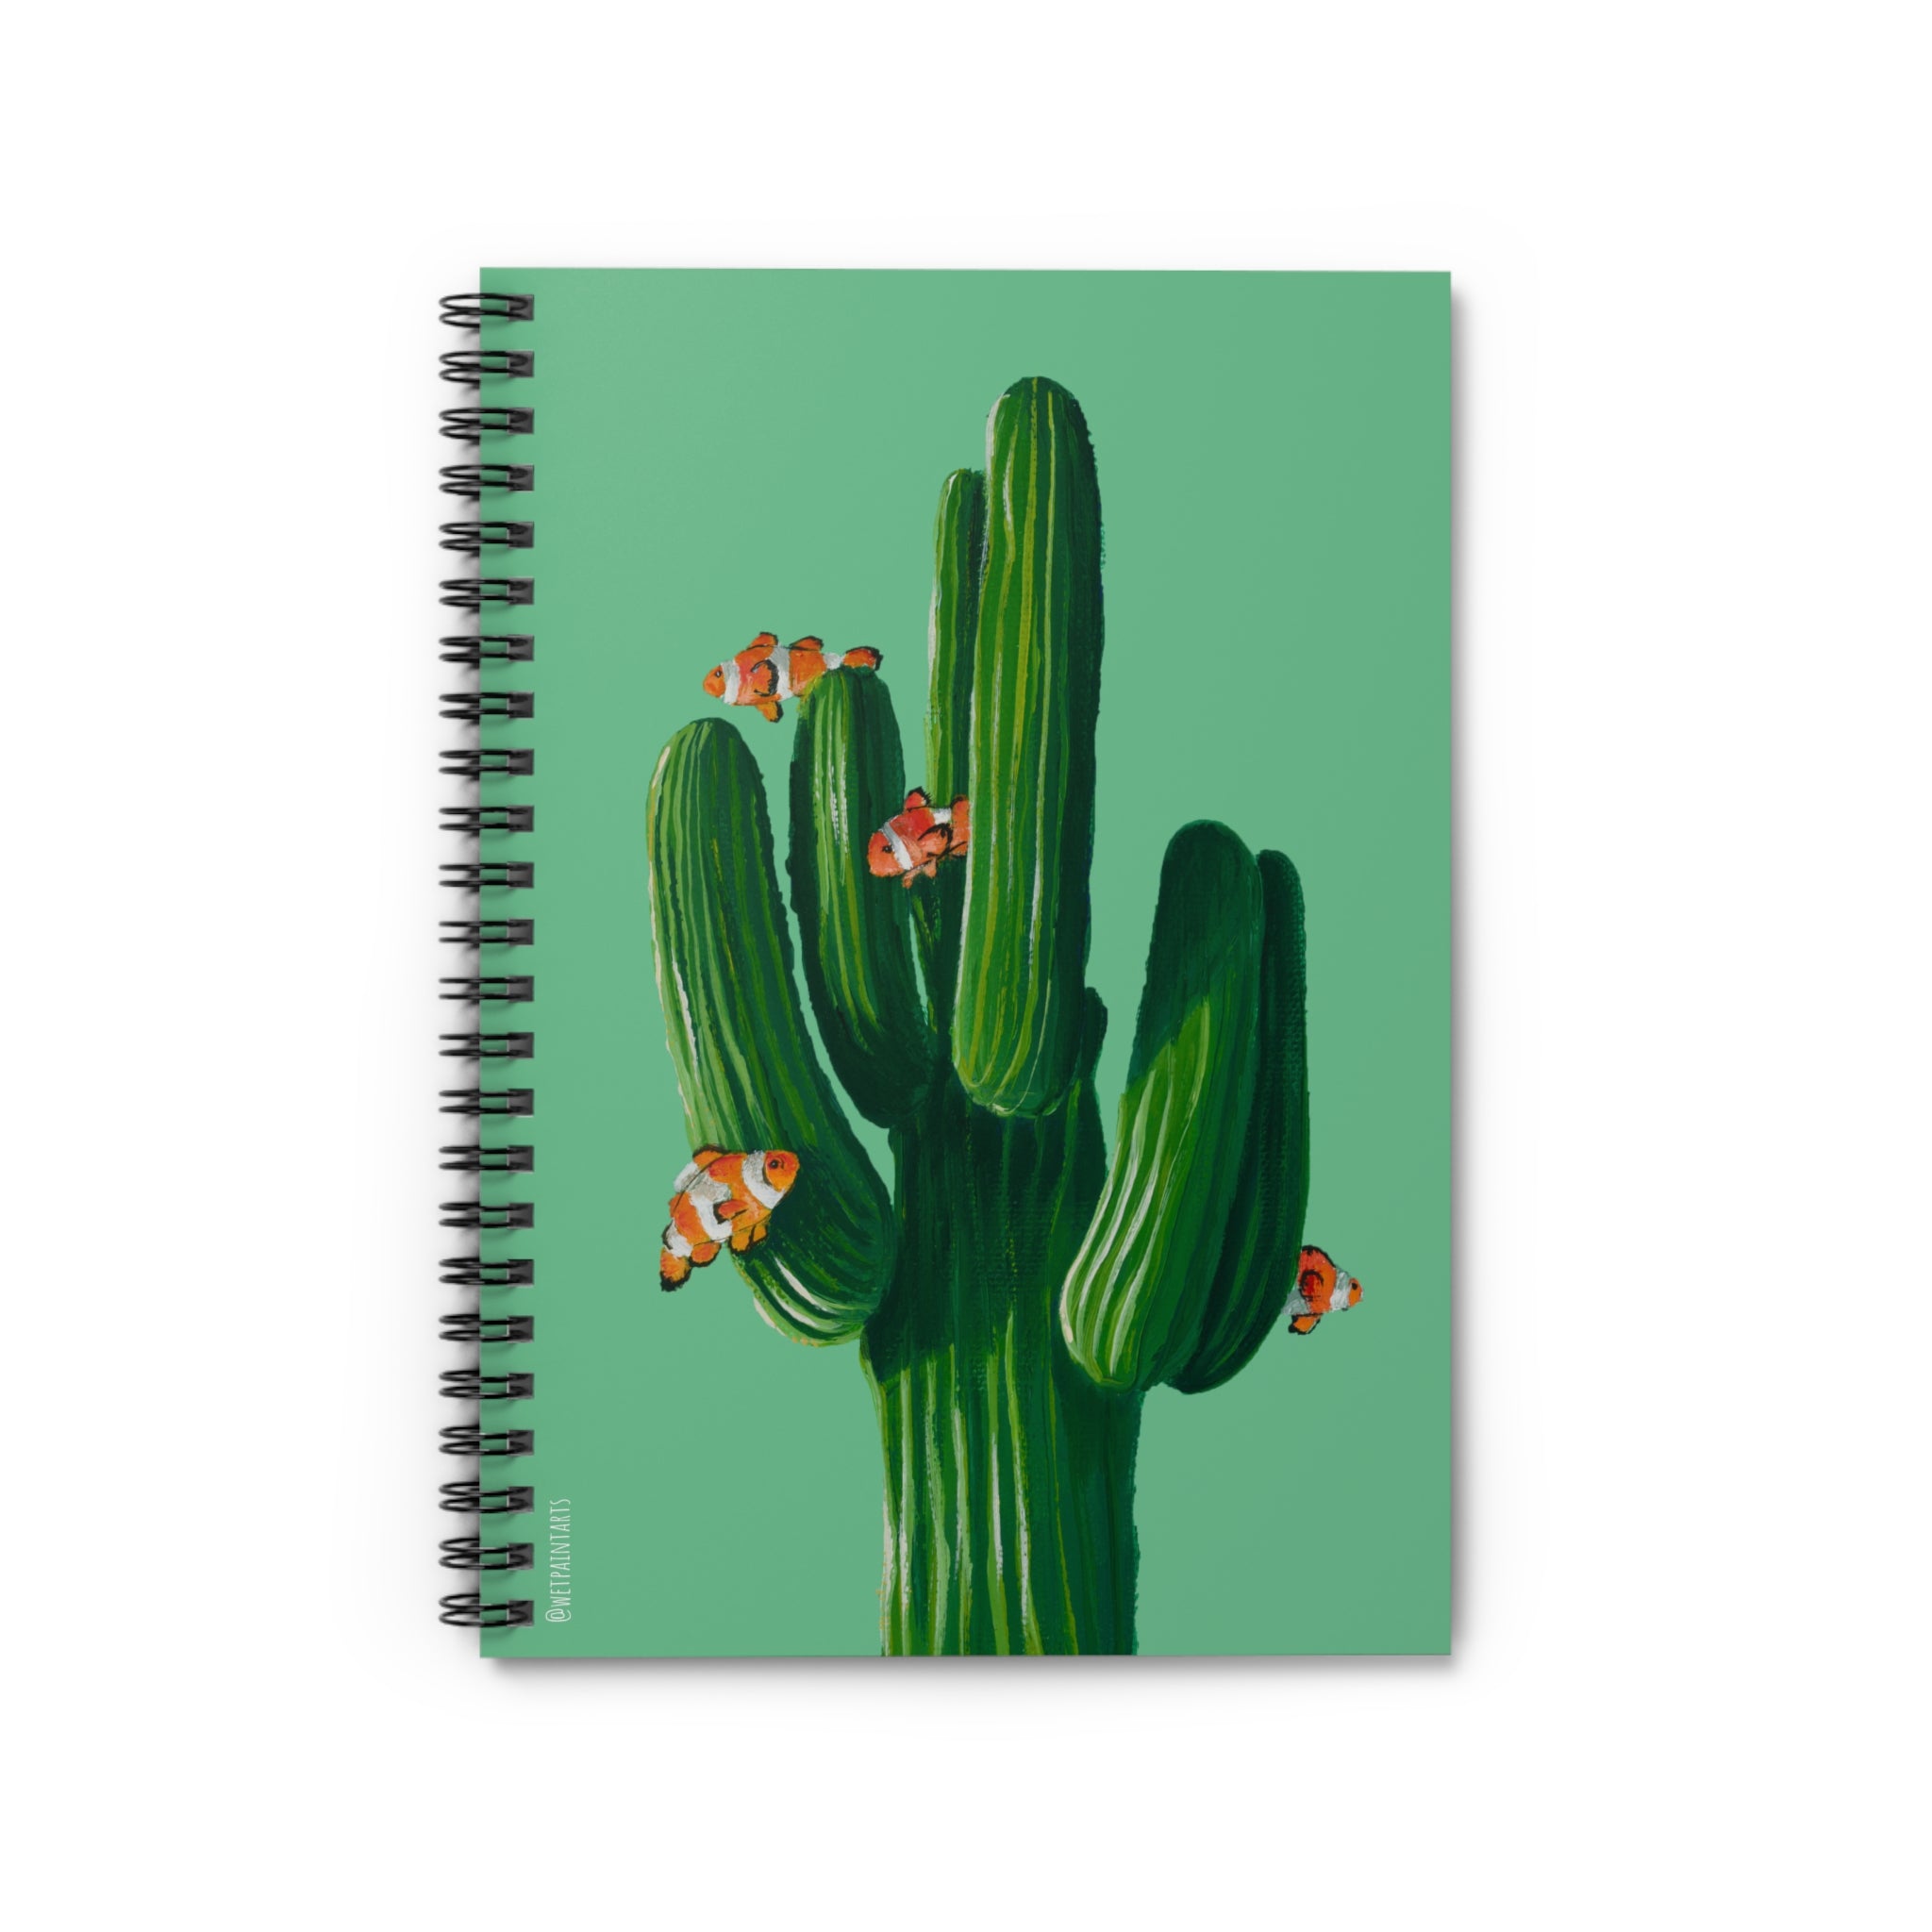 Clowns in the Cacti Mint Spiral Bound Notebook